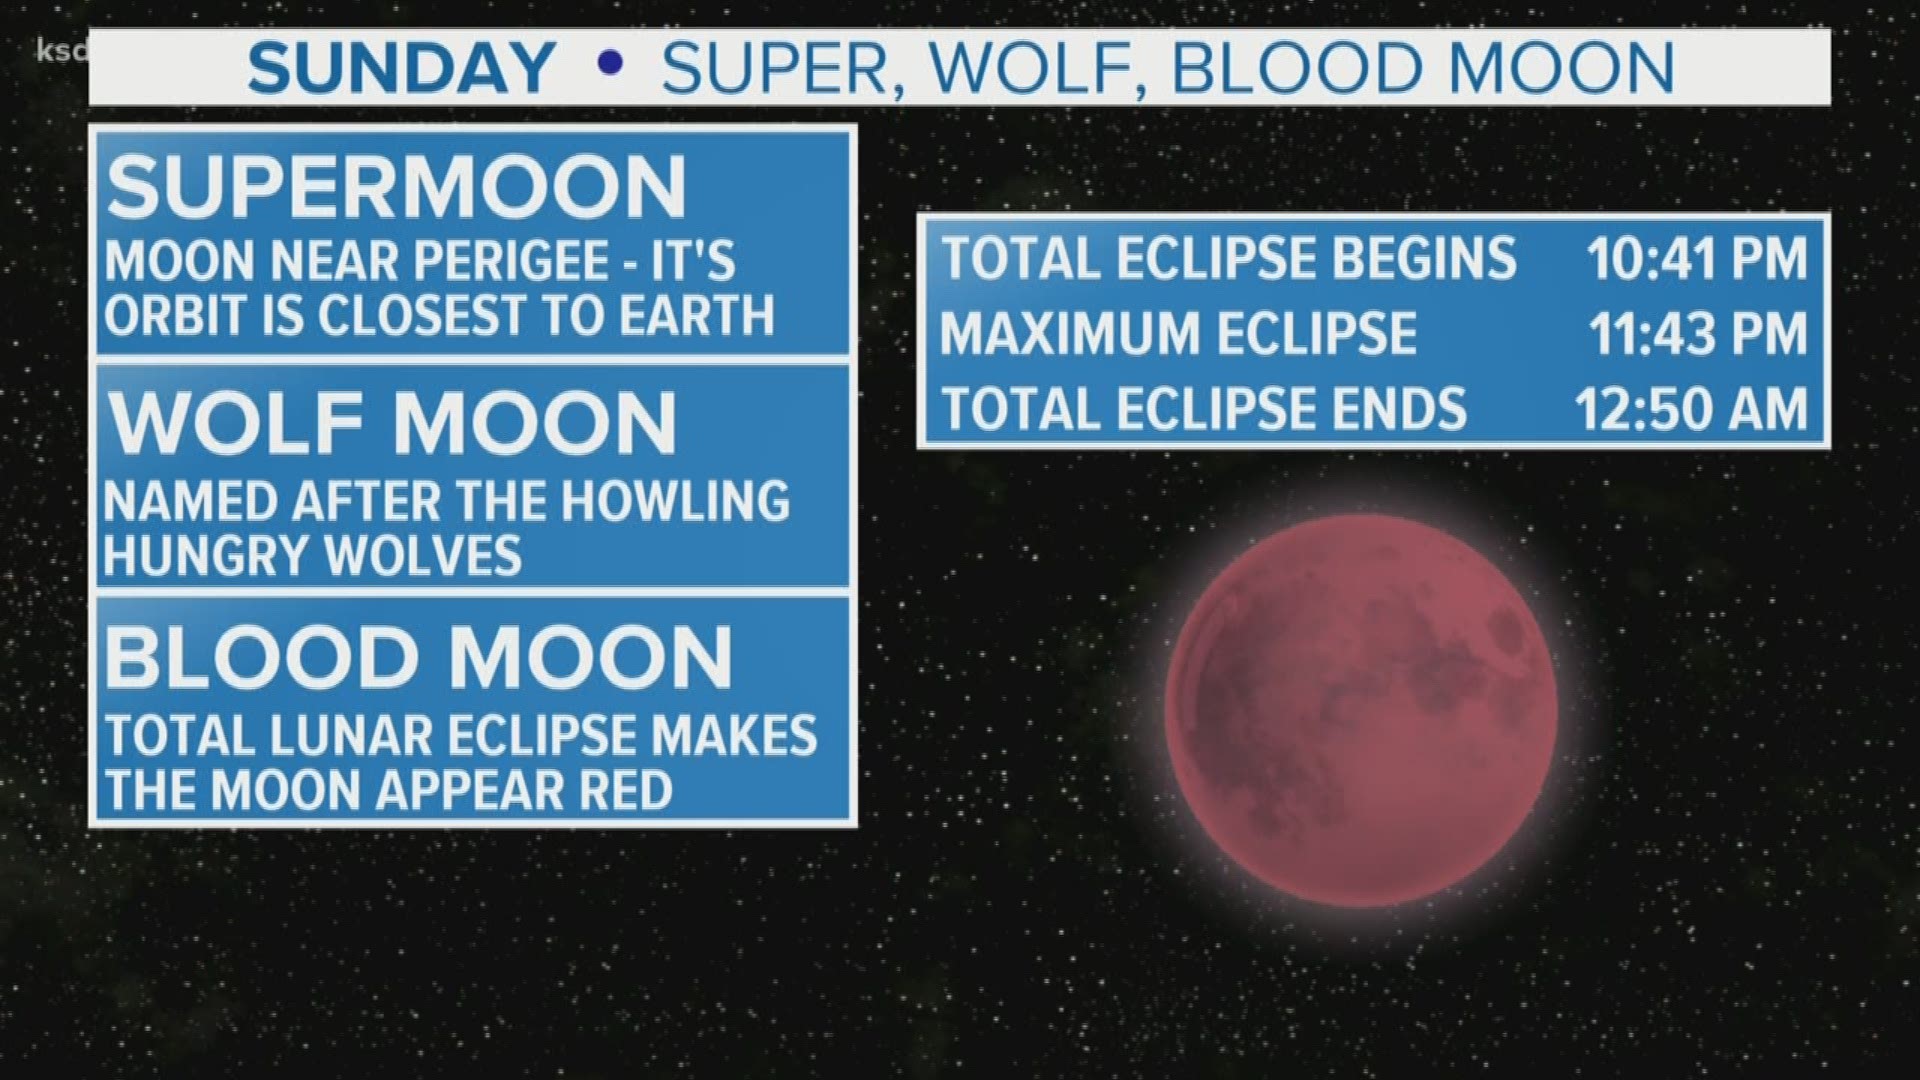 It's going to be the only total lunar eclipse of the year.